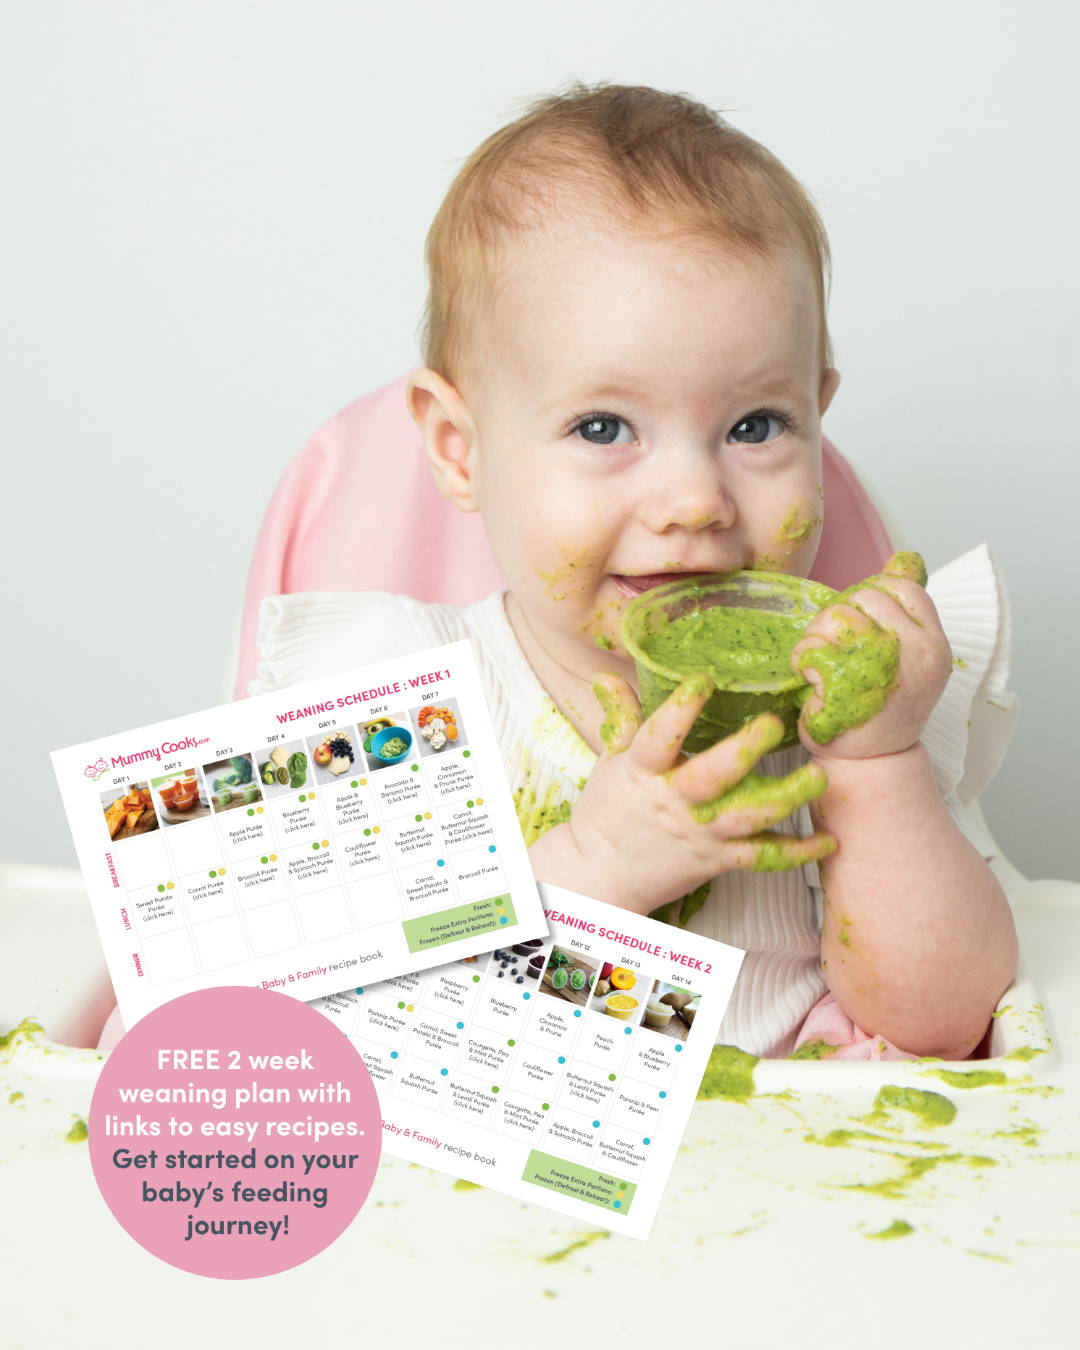 Free 2 Week Weaning Plan for Introducing Food and Feeding Baby 